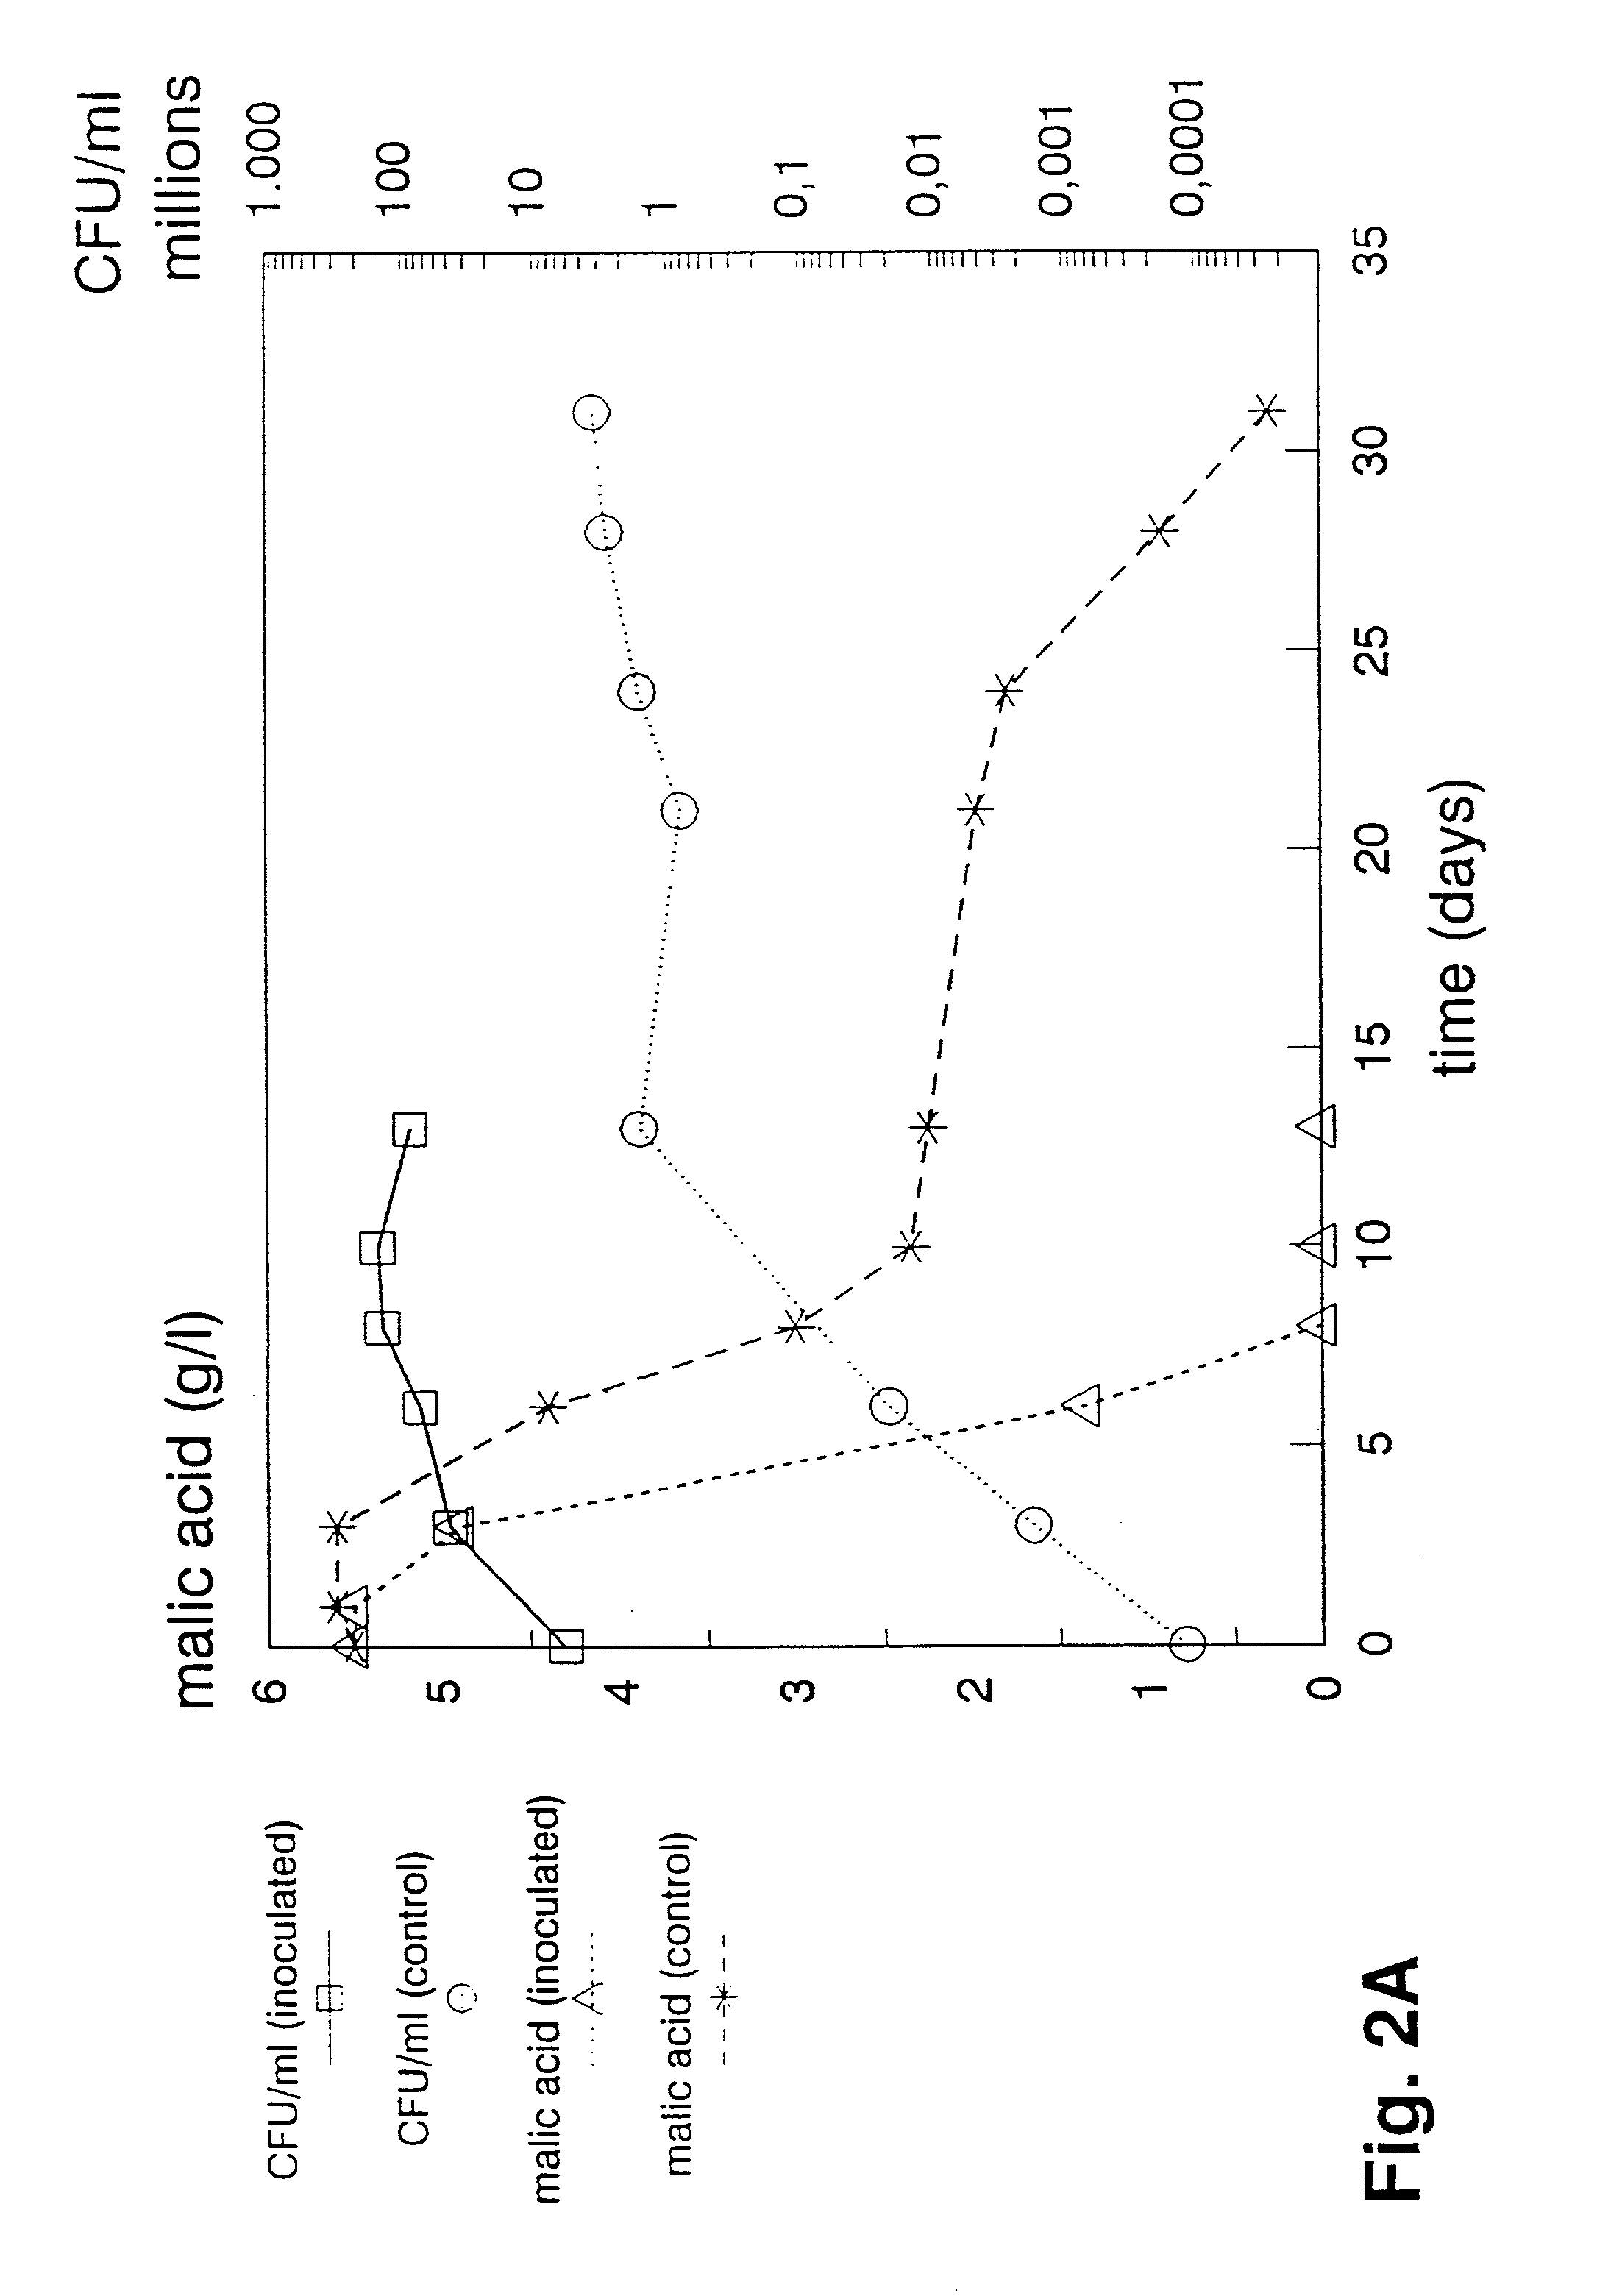 Method of inducing malolactic fermentation in wine or fruit juice by direct inoculation with a non-activated starter culture